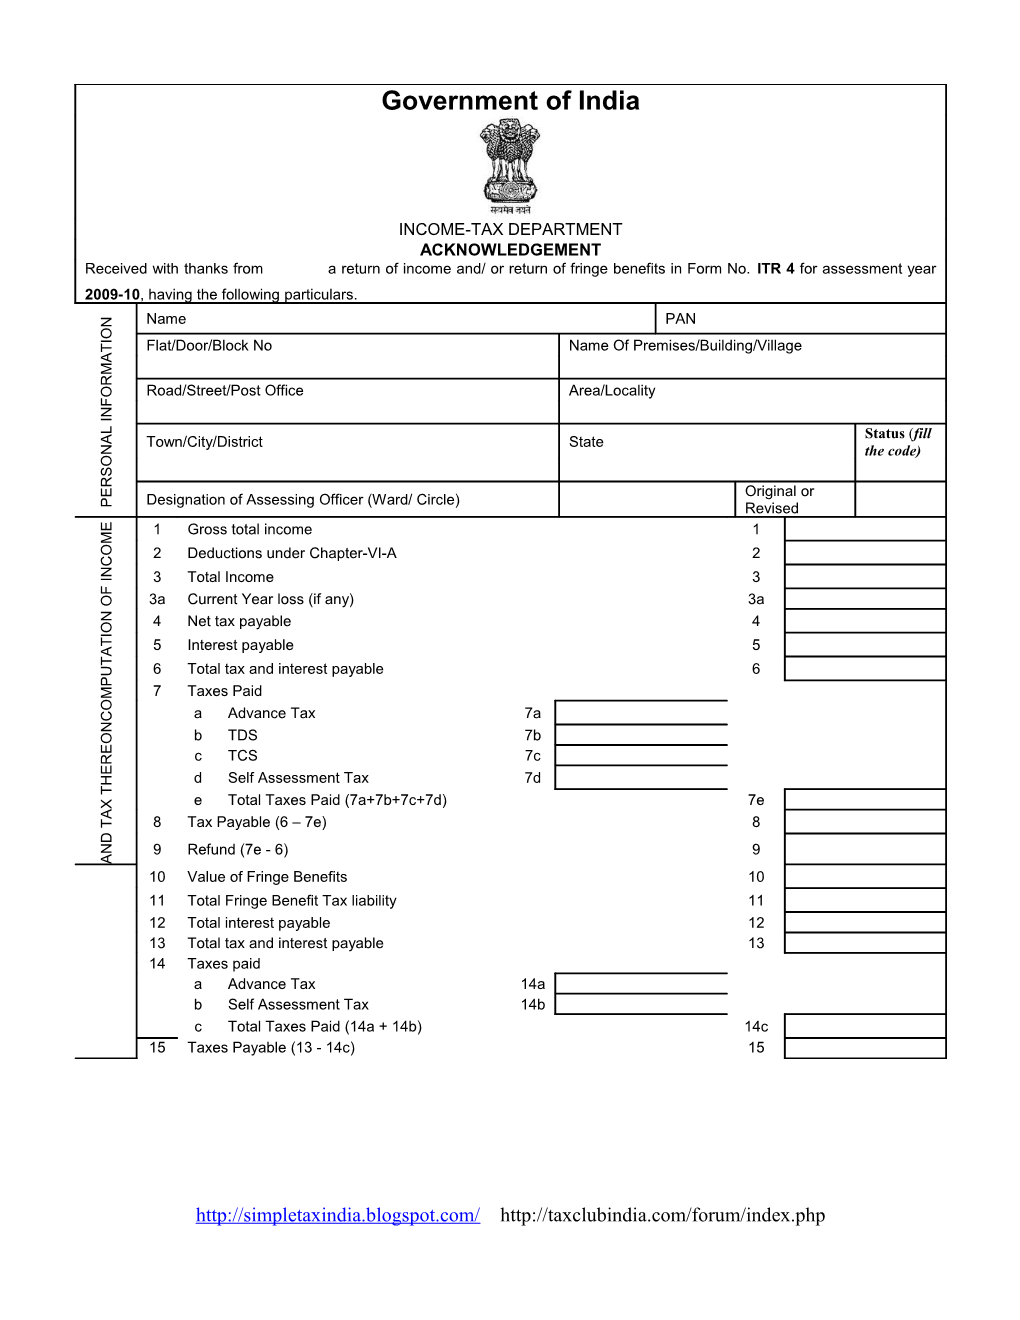 Government of India s21